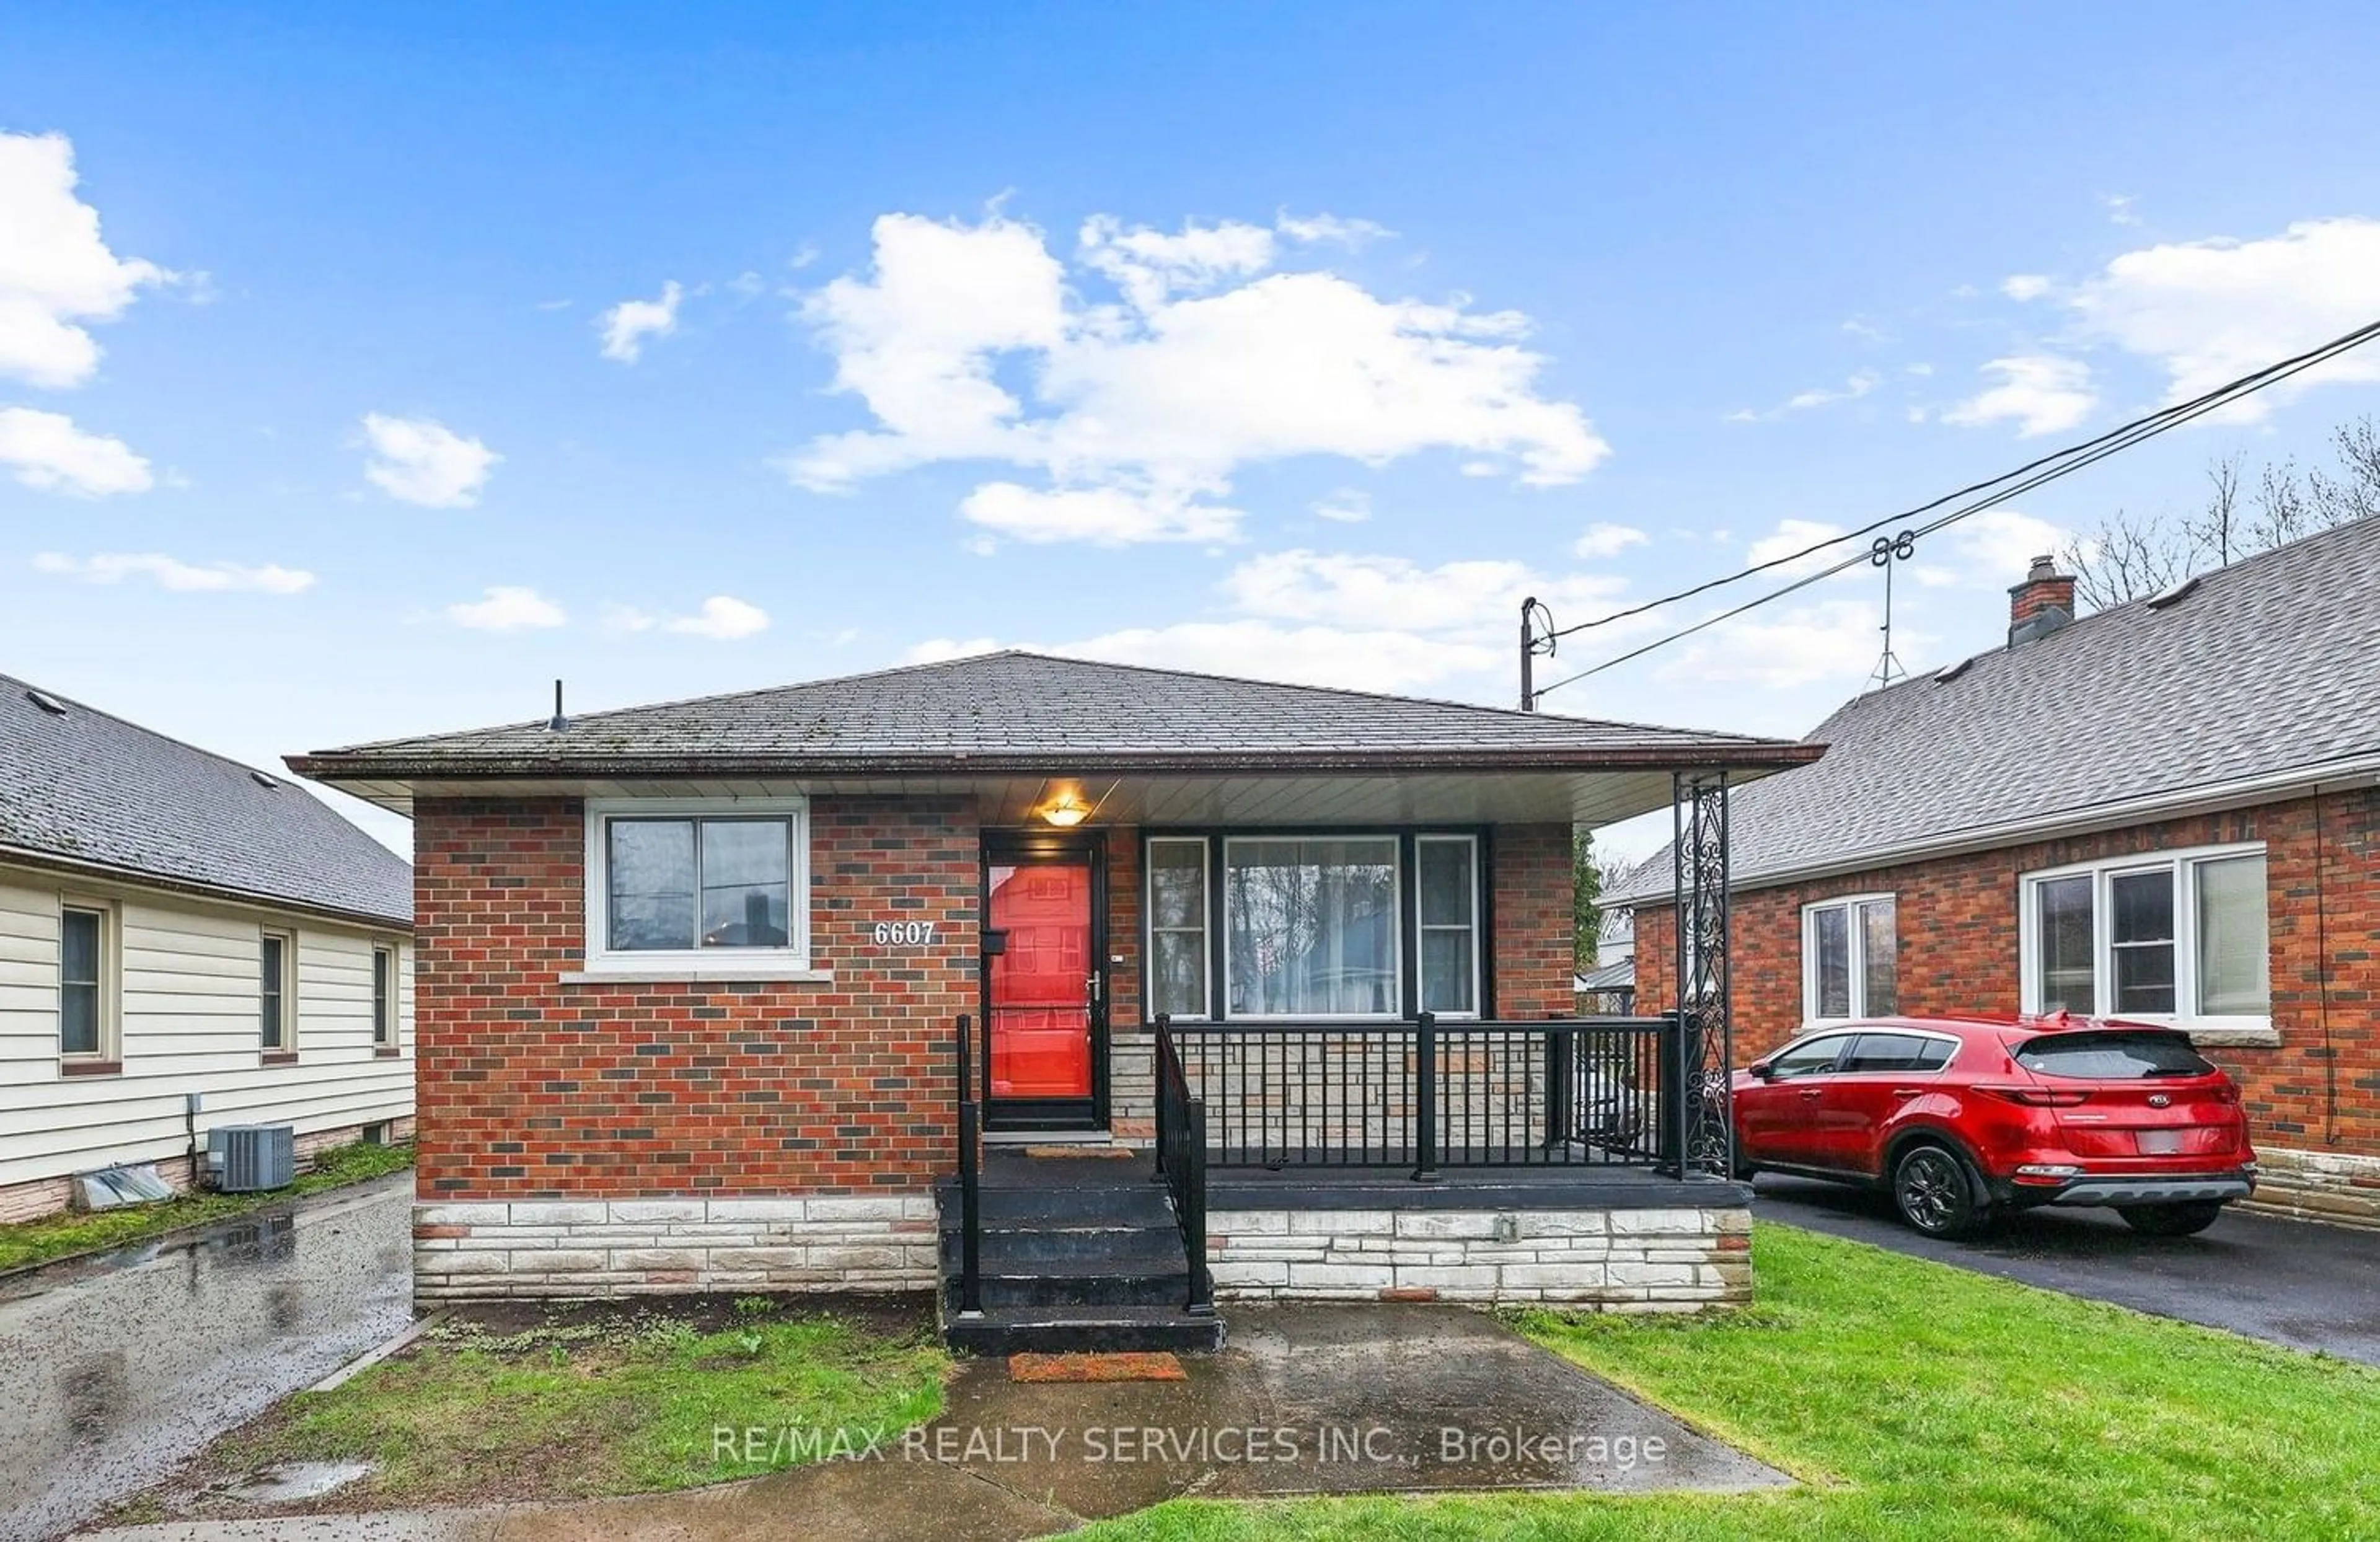 Frontside or backside of a home for 6607 Orchard Ave, Niagara Falls Ontario L2G 4H4